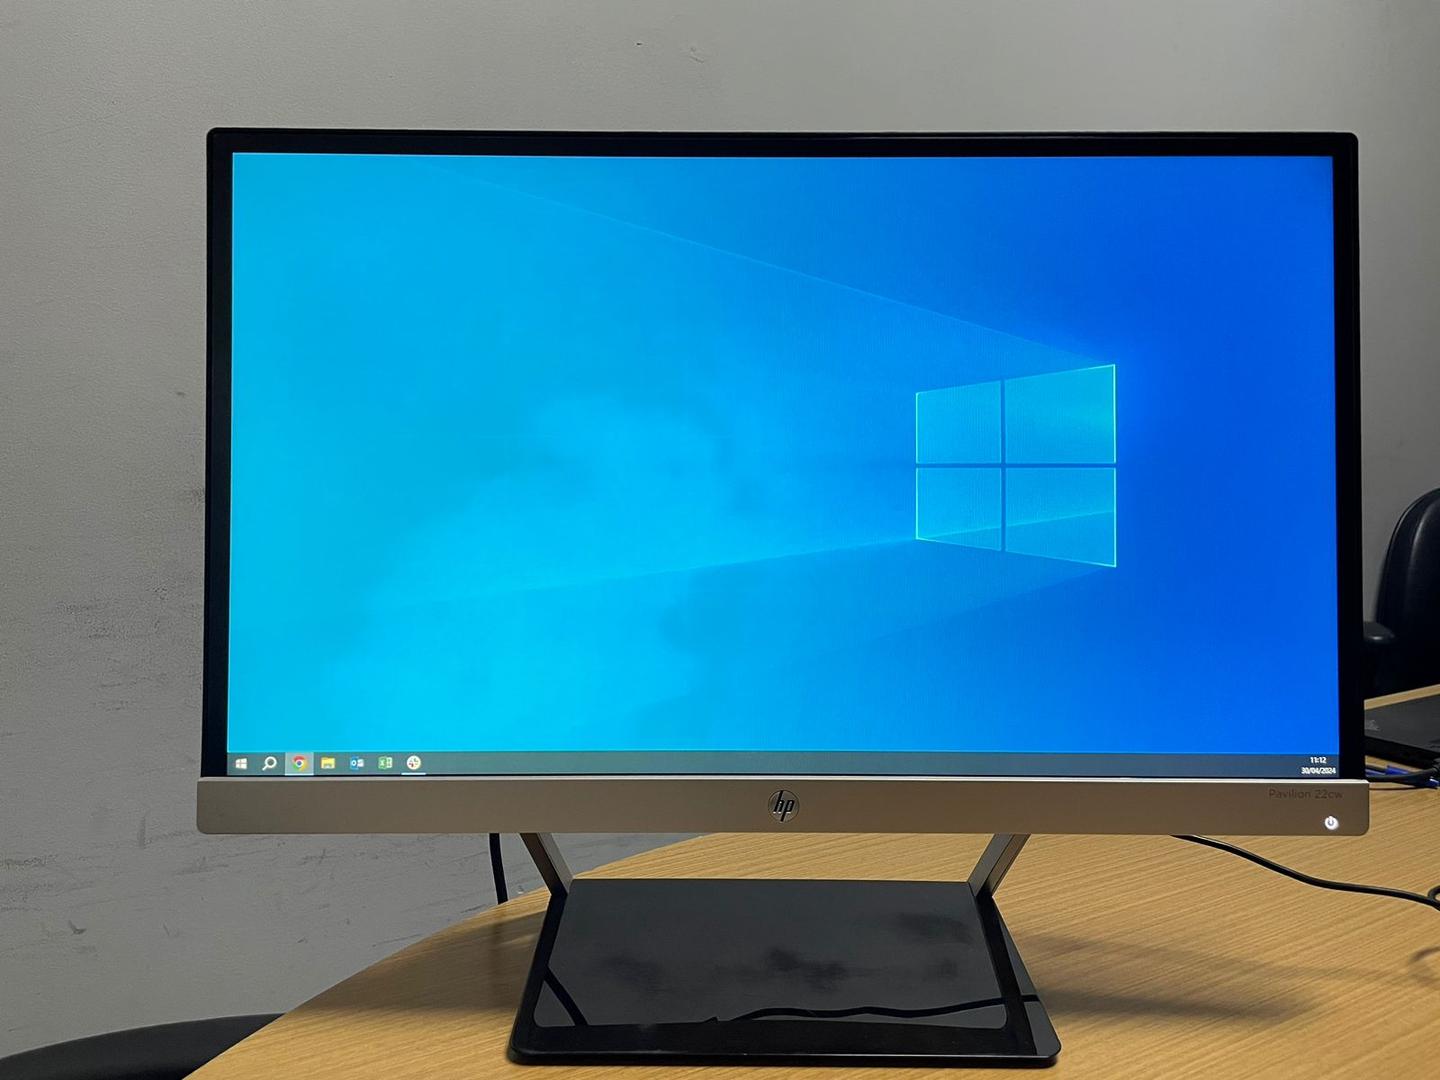 Monitor HP Pavilion 22cw 21.5in IPS LED Full HD